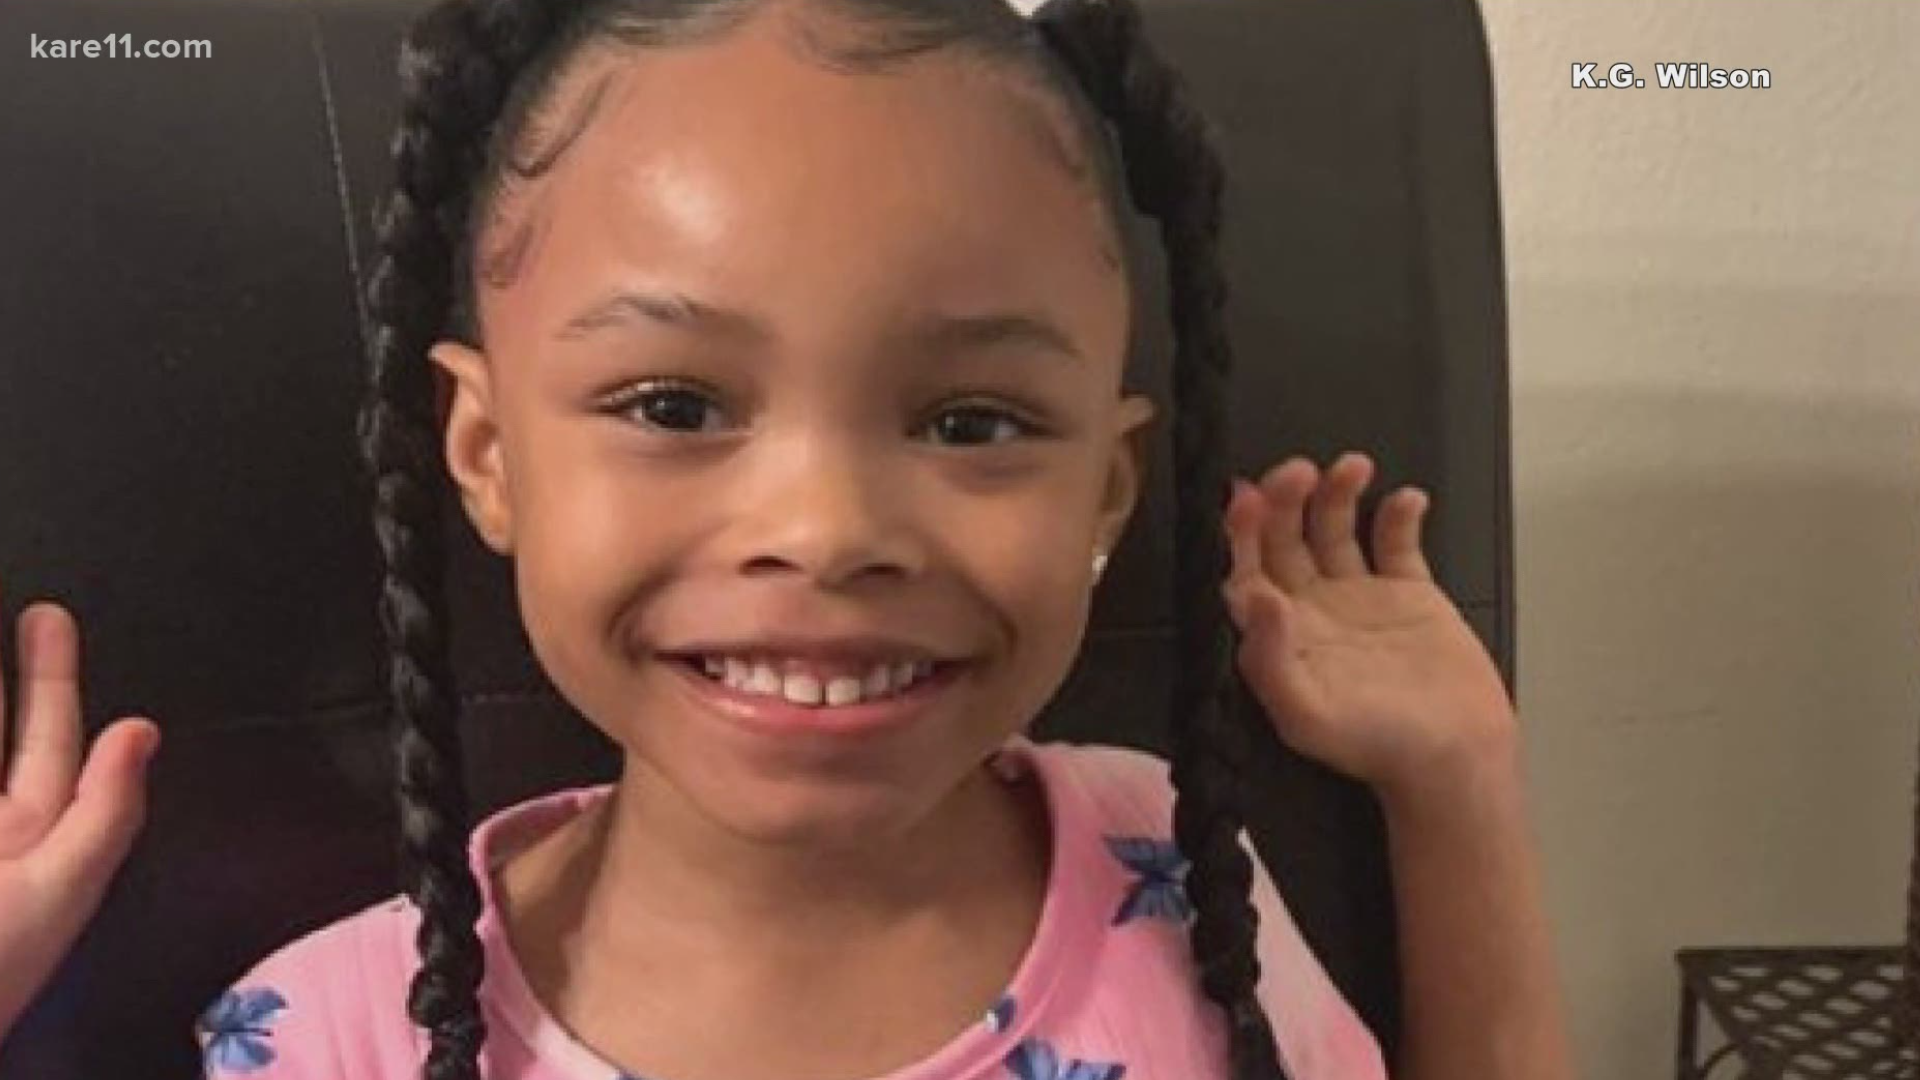 The little girl, 6-year-old Aniya Allen, was fatally wounded Monday night while eating McDonald's in her family's car.